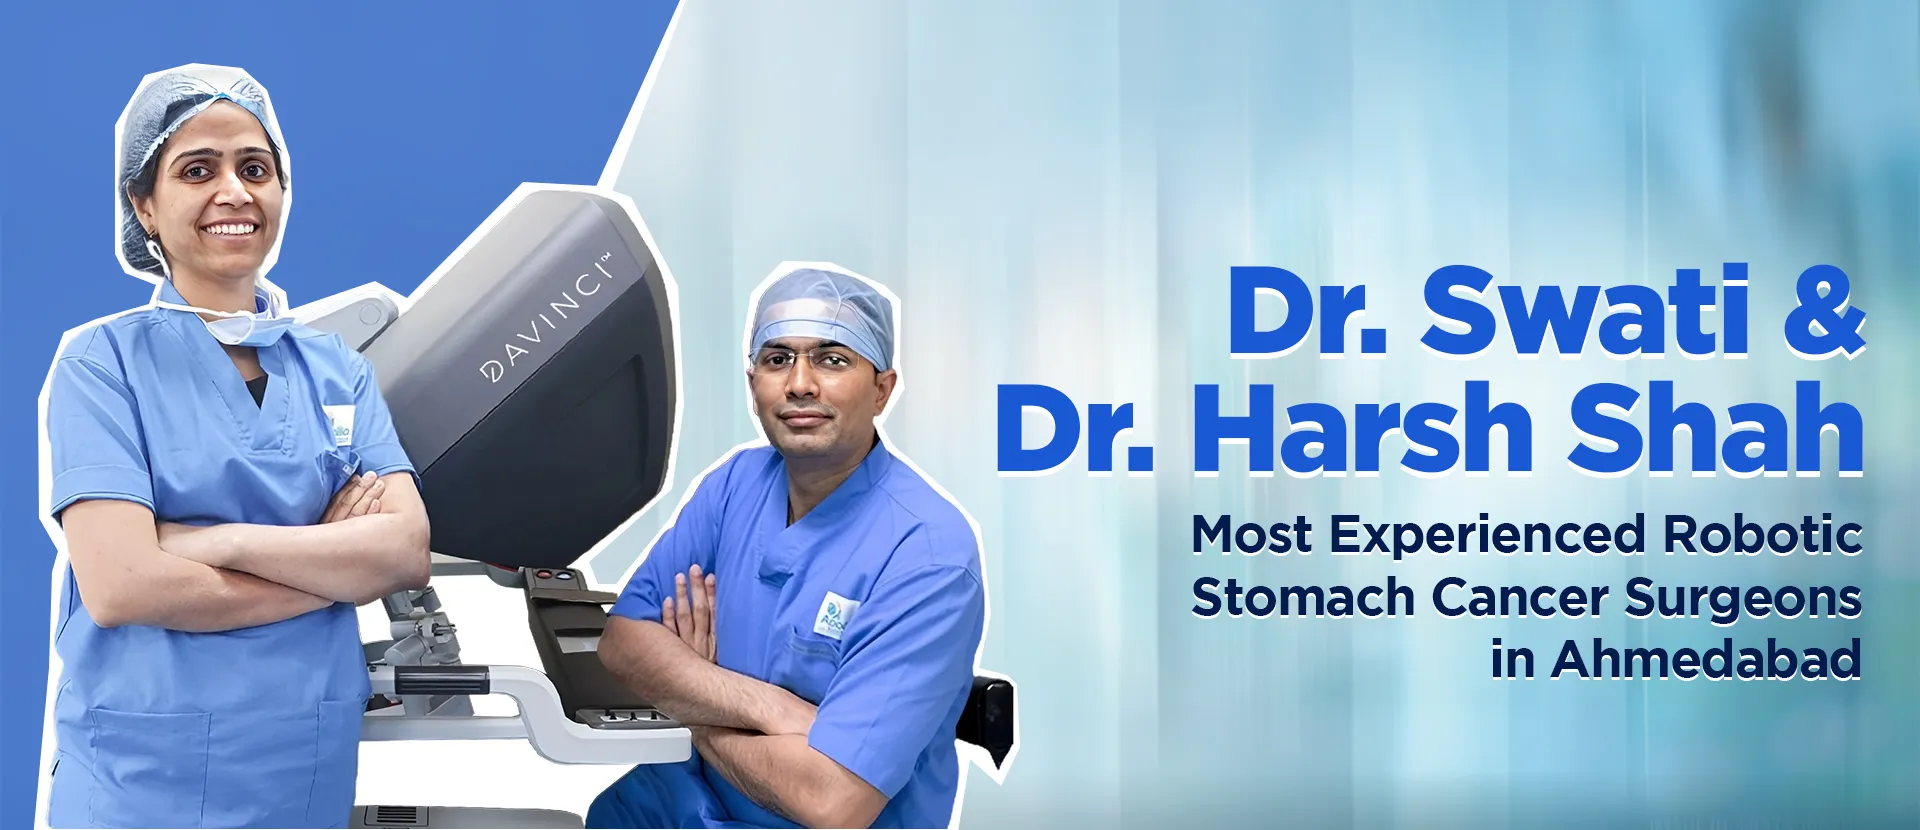 Best Stoamch cancer Treatment with Robotic Surgery in Ahmedabad, Gujarat, India